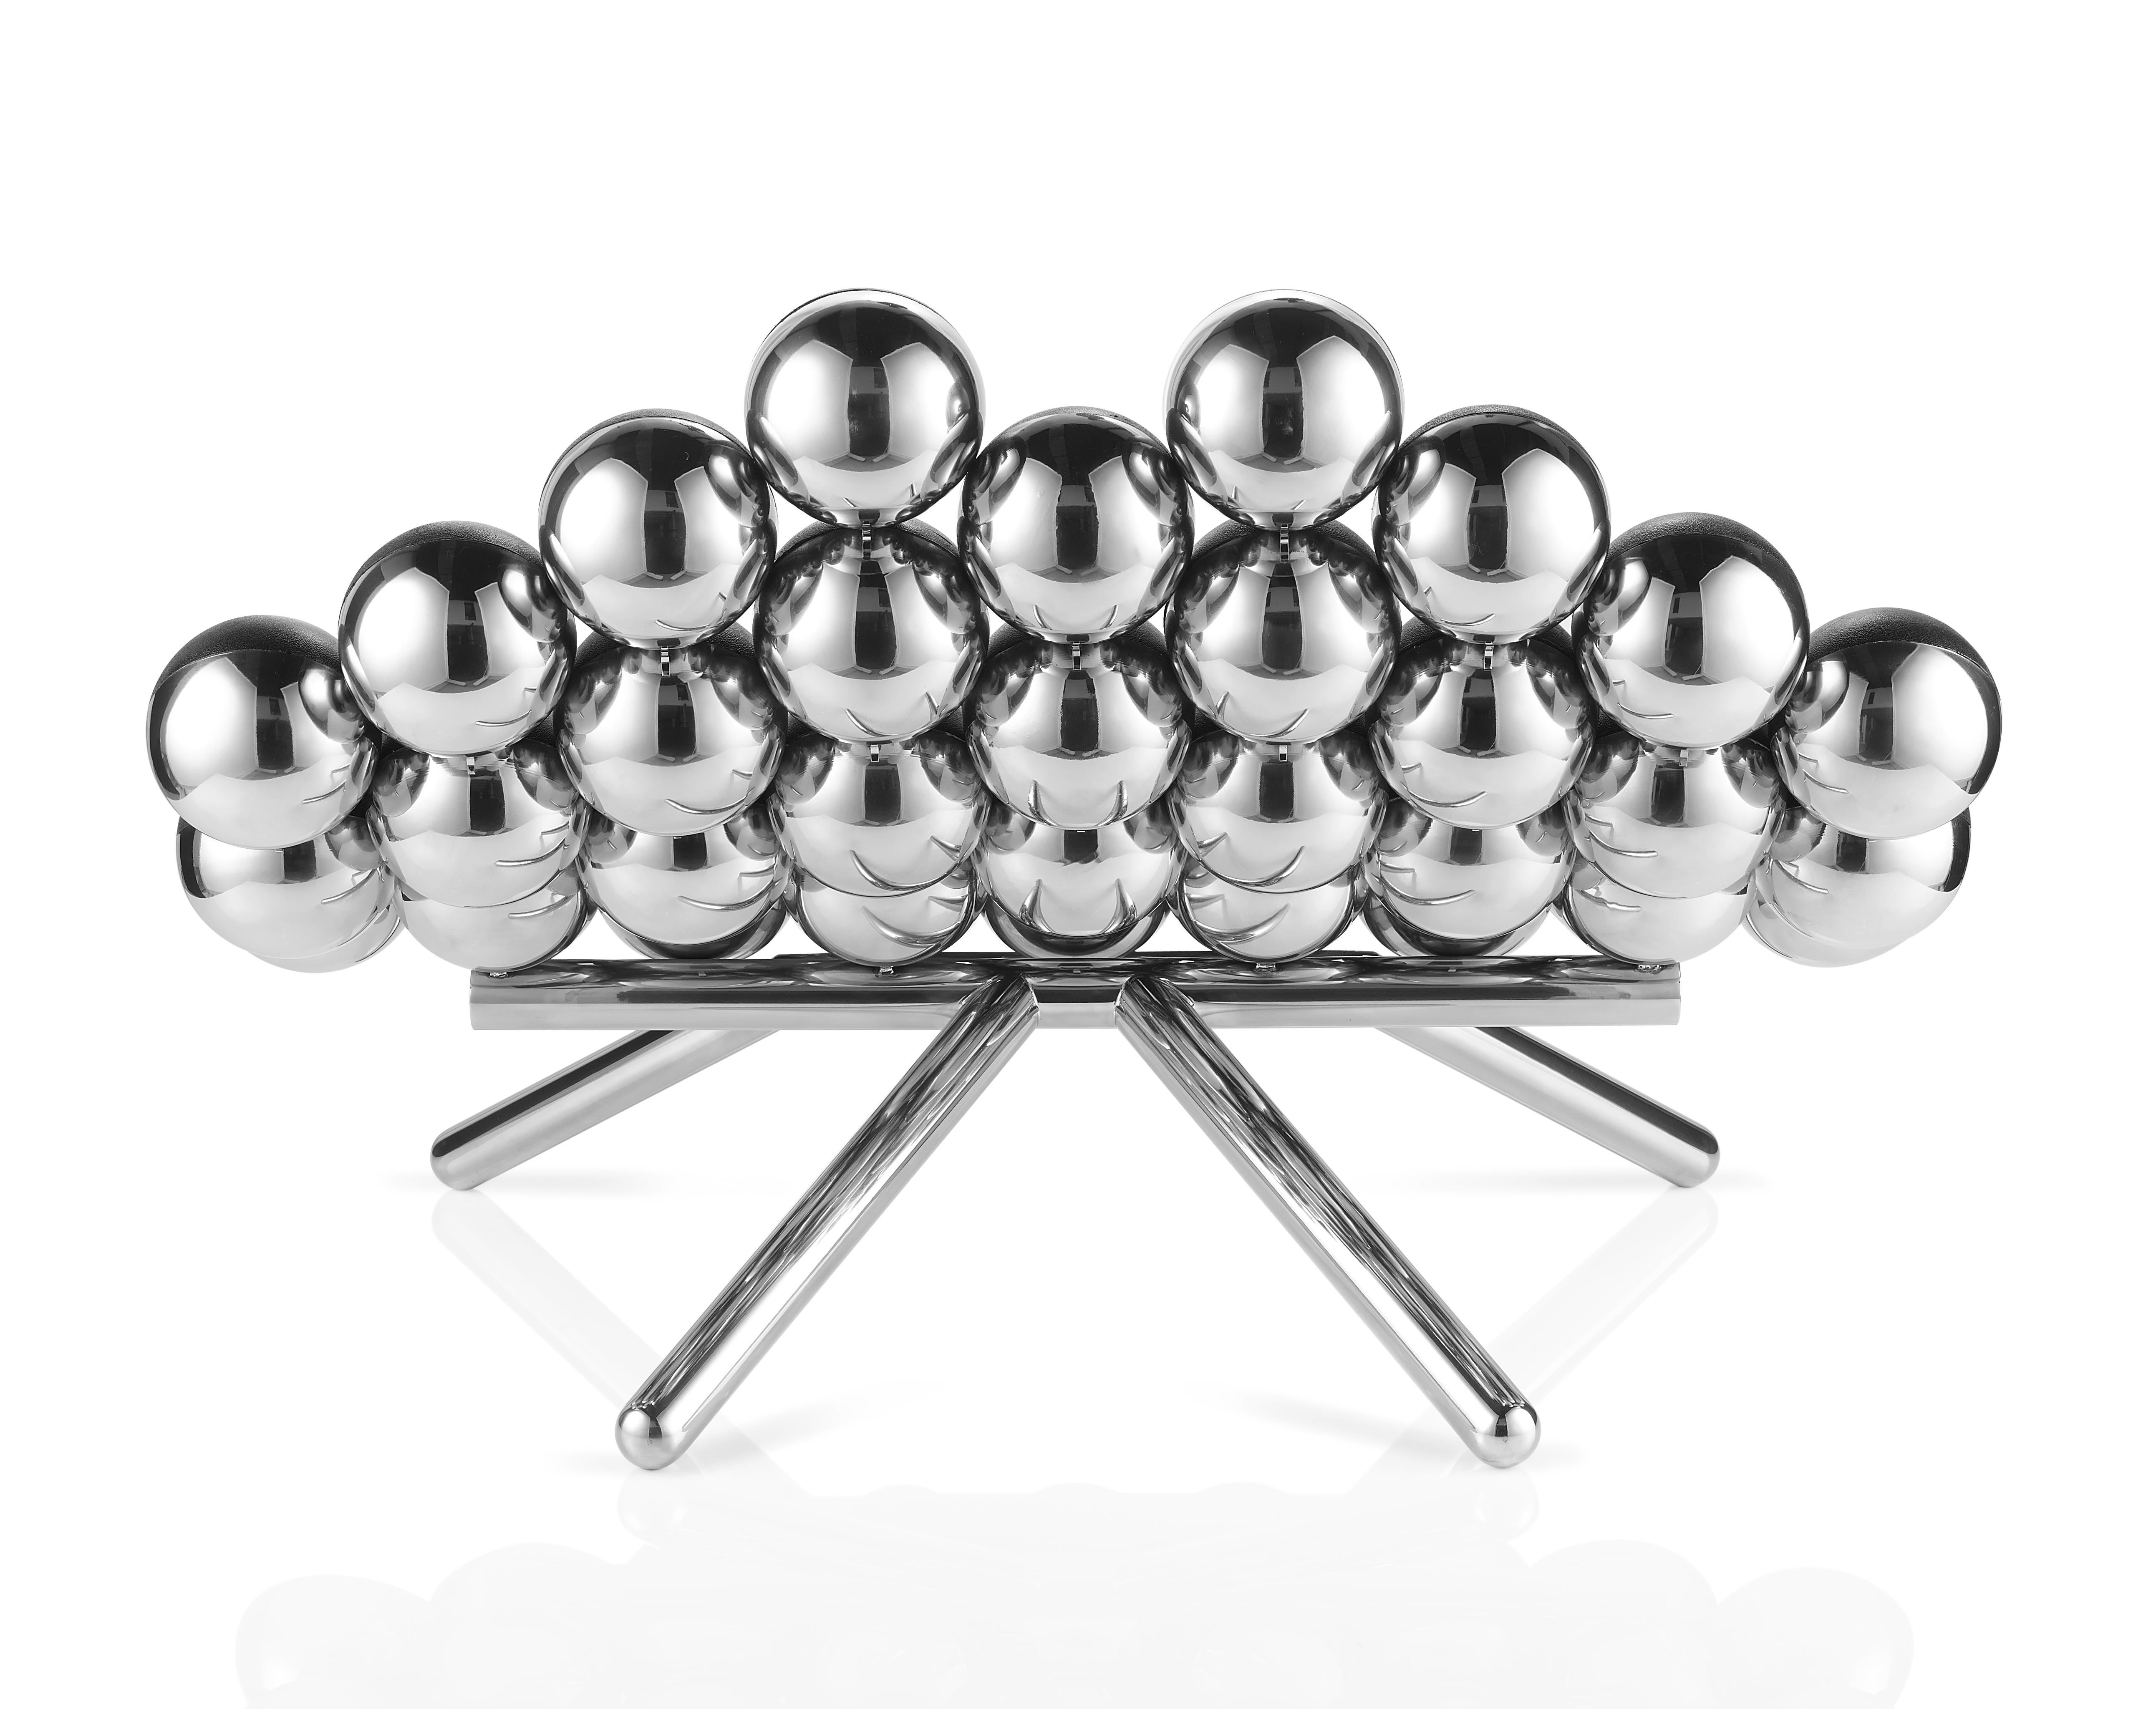 40 spheres carefully balanced to create this unique sofa that challenges the limits of furniture-making.
The unconventional mixture of shapes and textures expresses the artist's vision of sophistication and character.
Flawless mirror polished